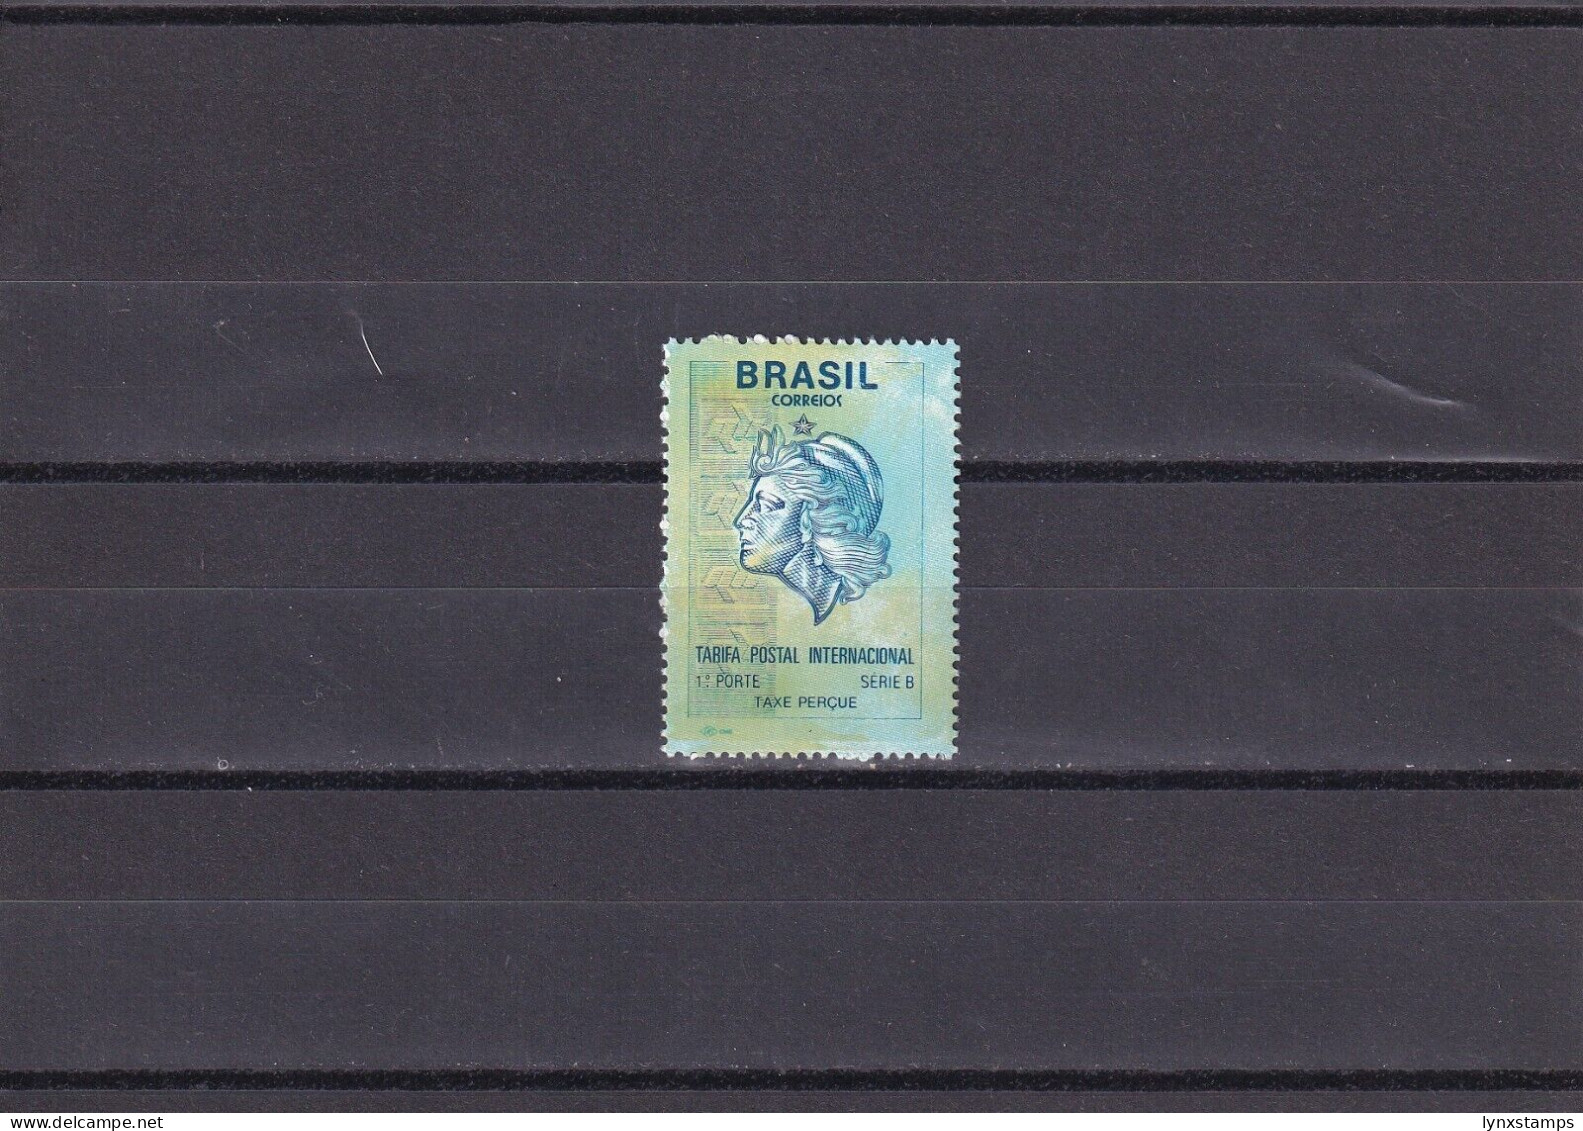 SA06 Brazil 1993 Stamp With No Value Expressed Mint Stamp - Neufs